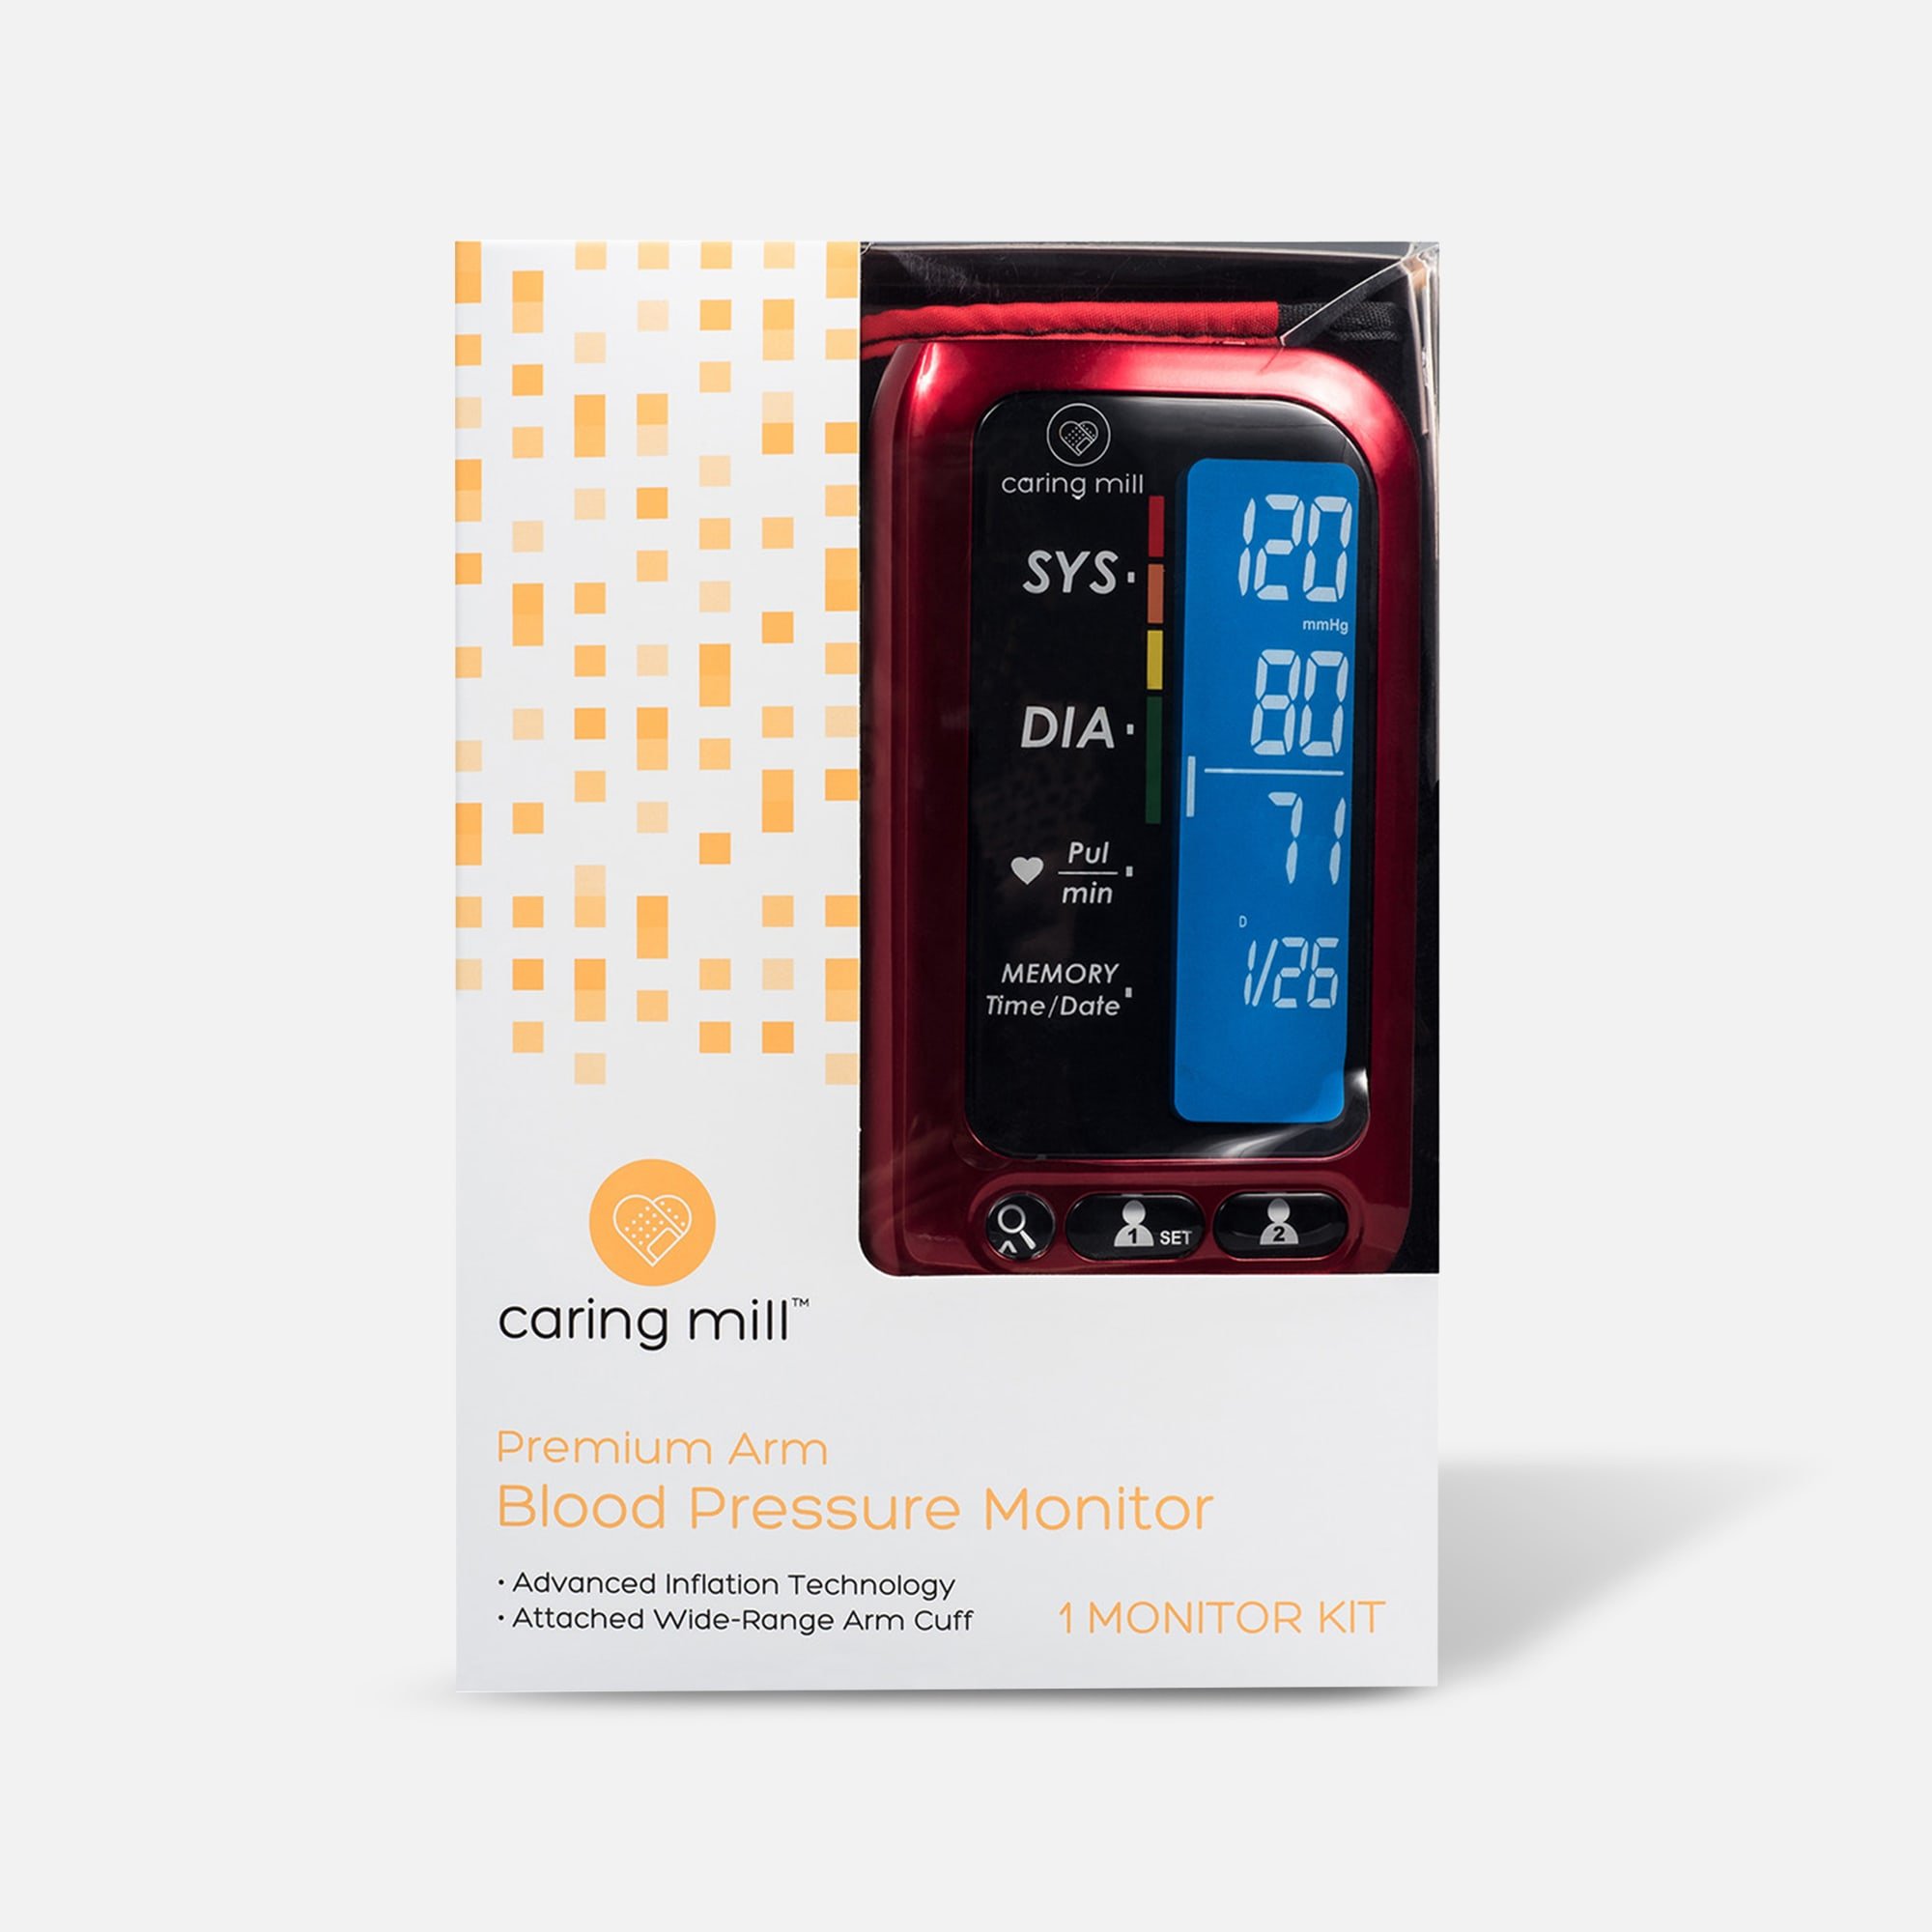 https://www.welldeservedhealth.com/on/demandware.static/-/Sites-hec-master/default/dw6ca136eb/images/large/caring-mill-upper-arm-blood-pressure-monitor-27517-4.jpg